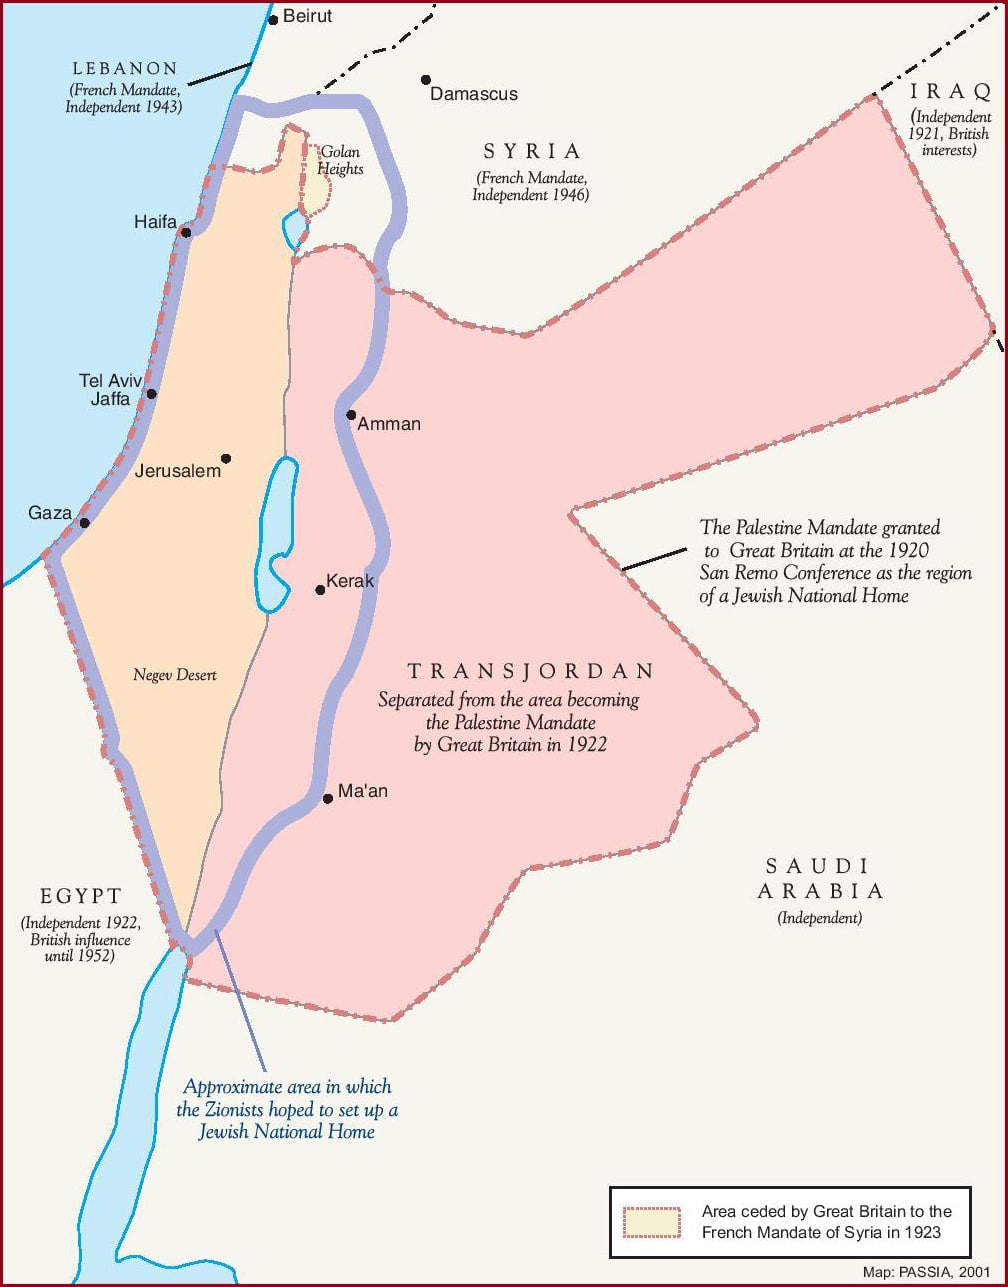 Map of the mandate of Palestine, showing its borders with Transjordan, Syria, Egypt and Lebanon.